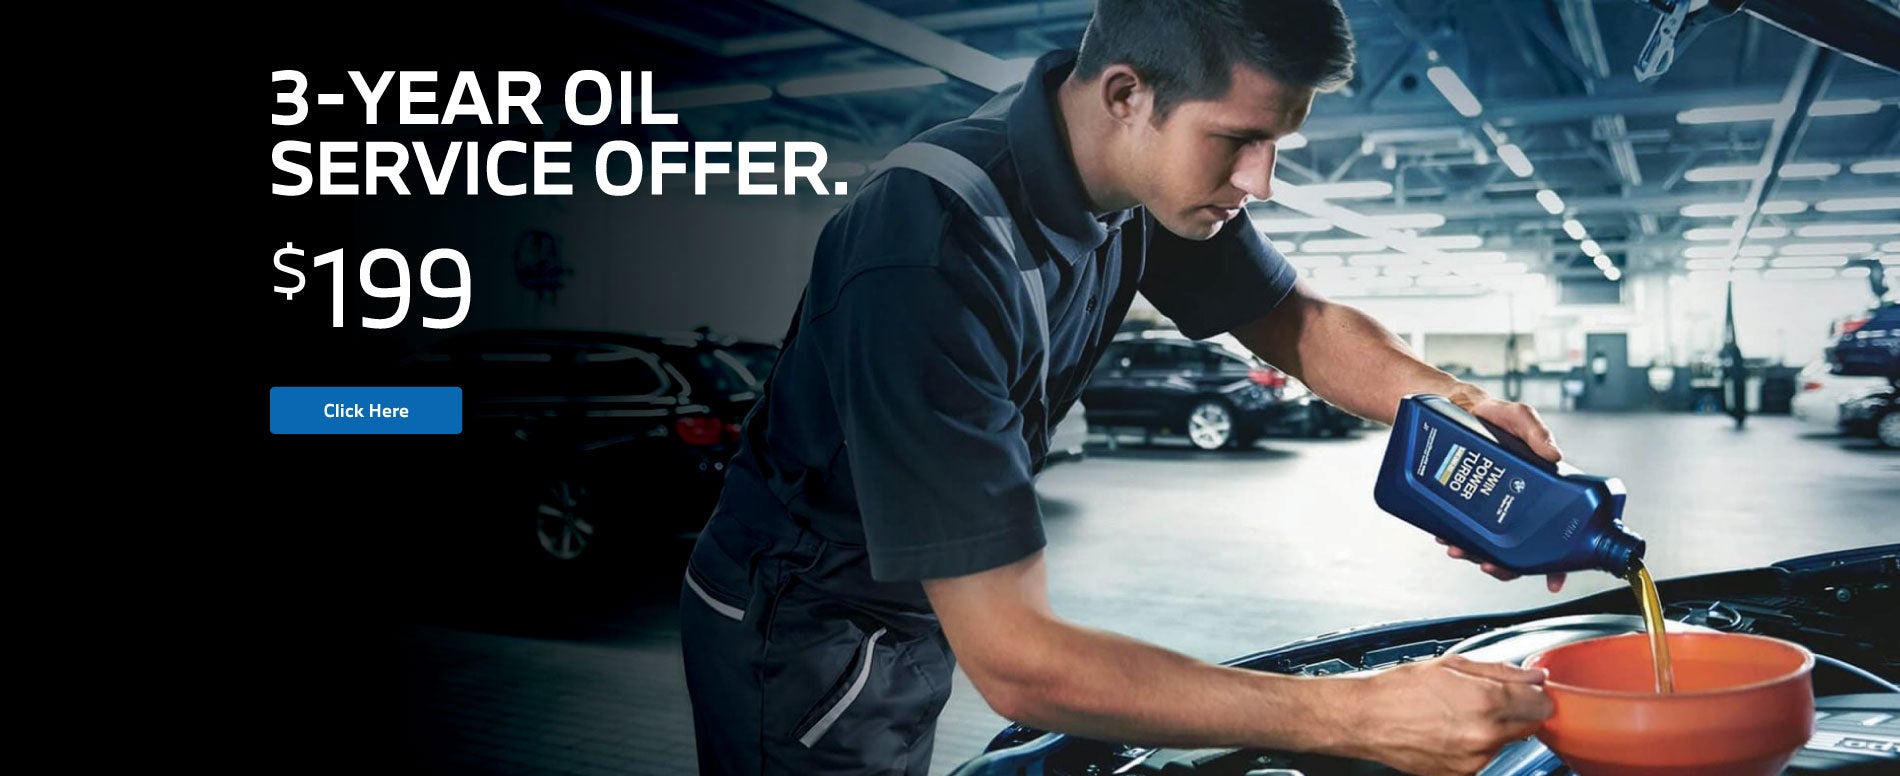 $199 3 year Oil Service Offer